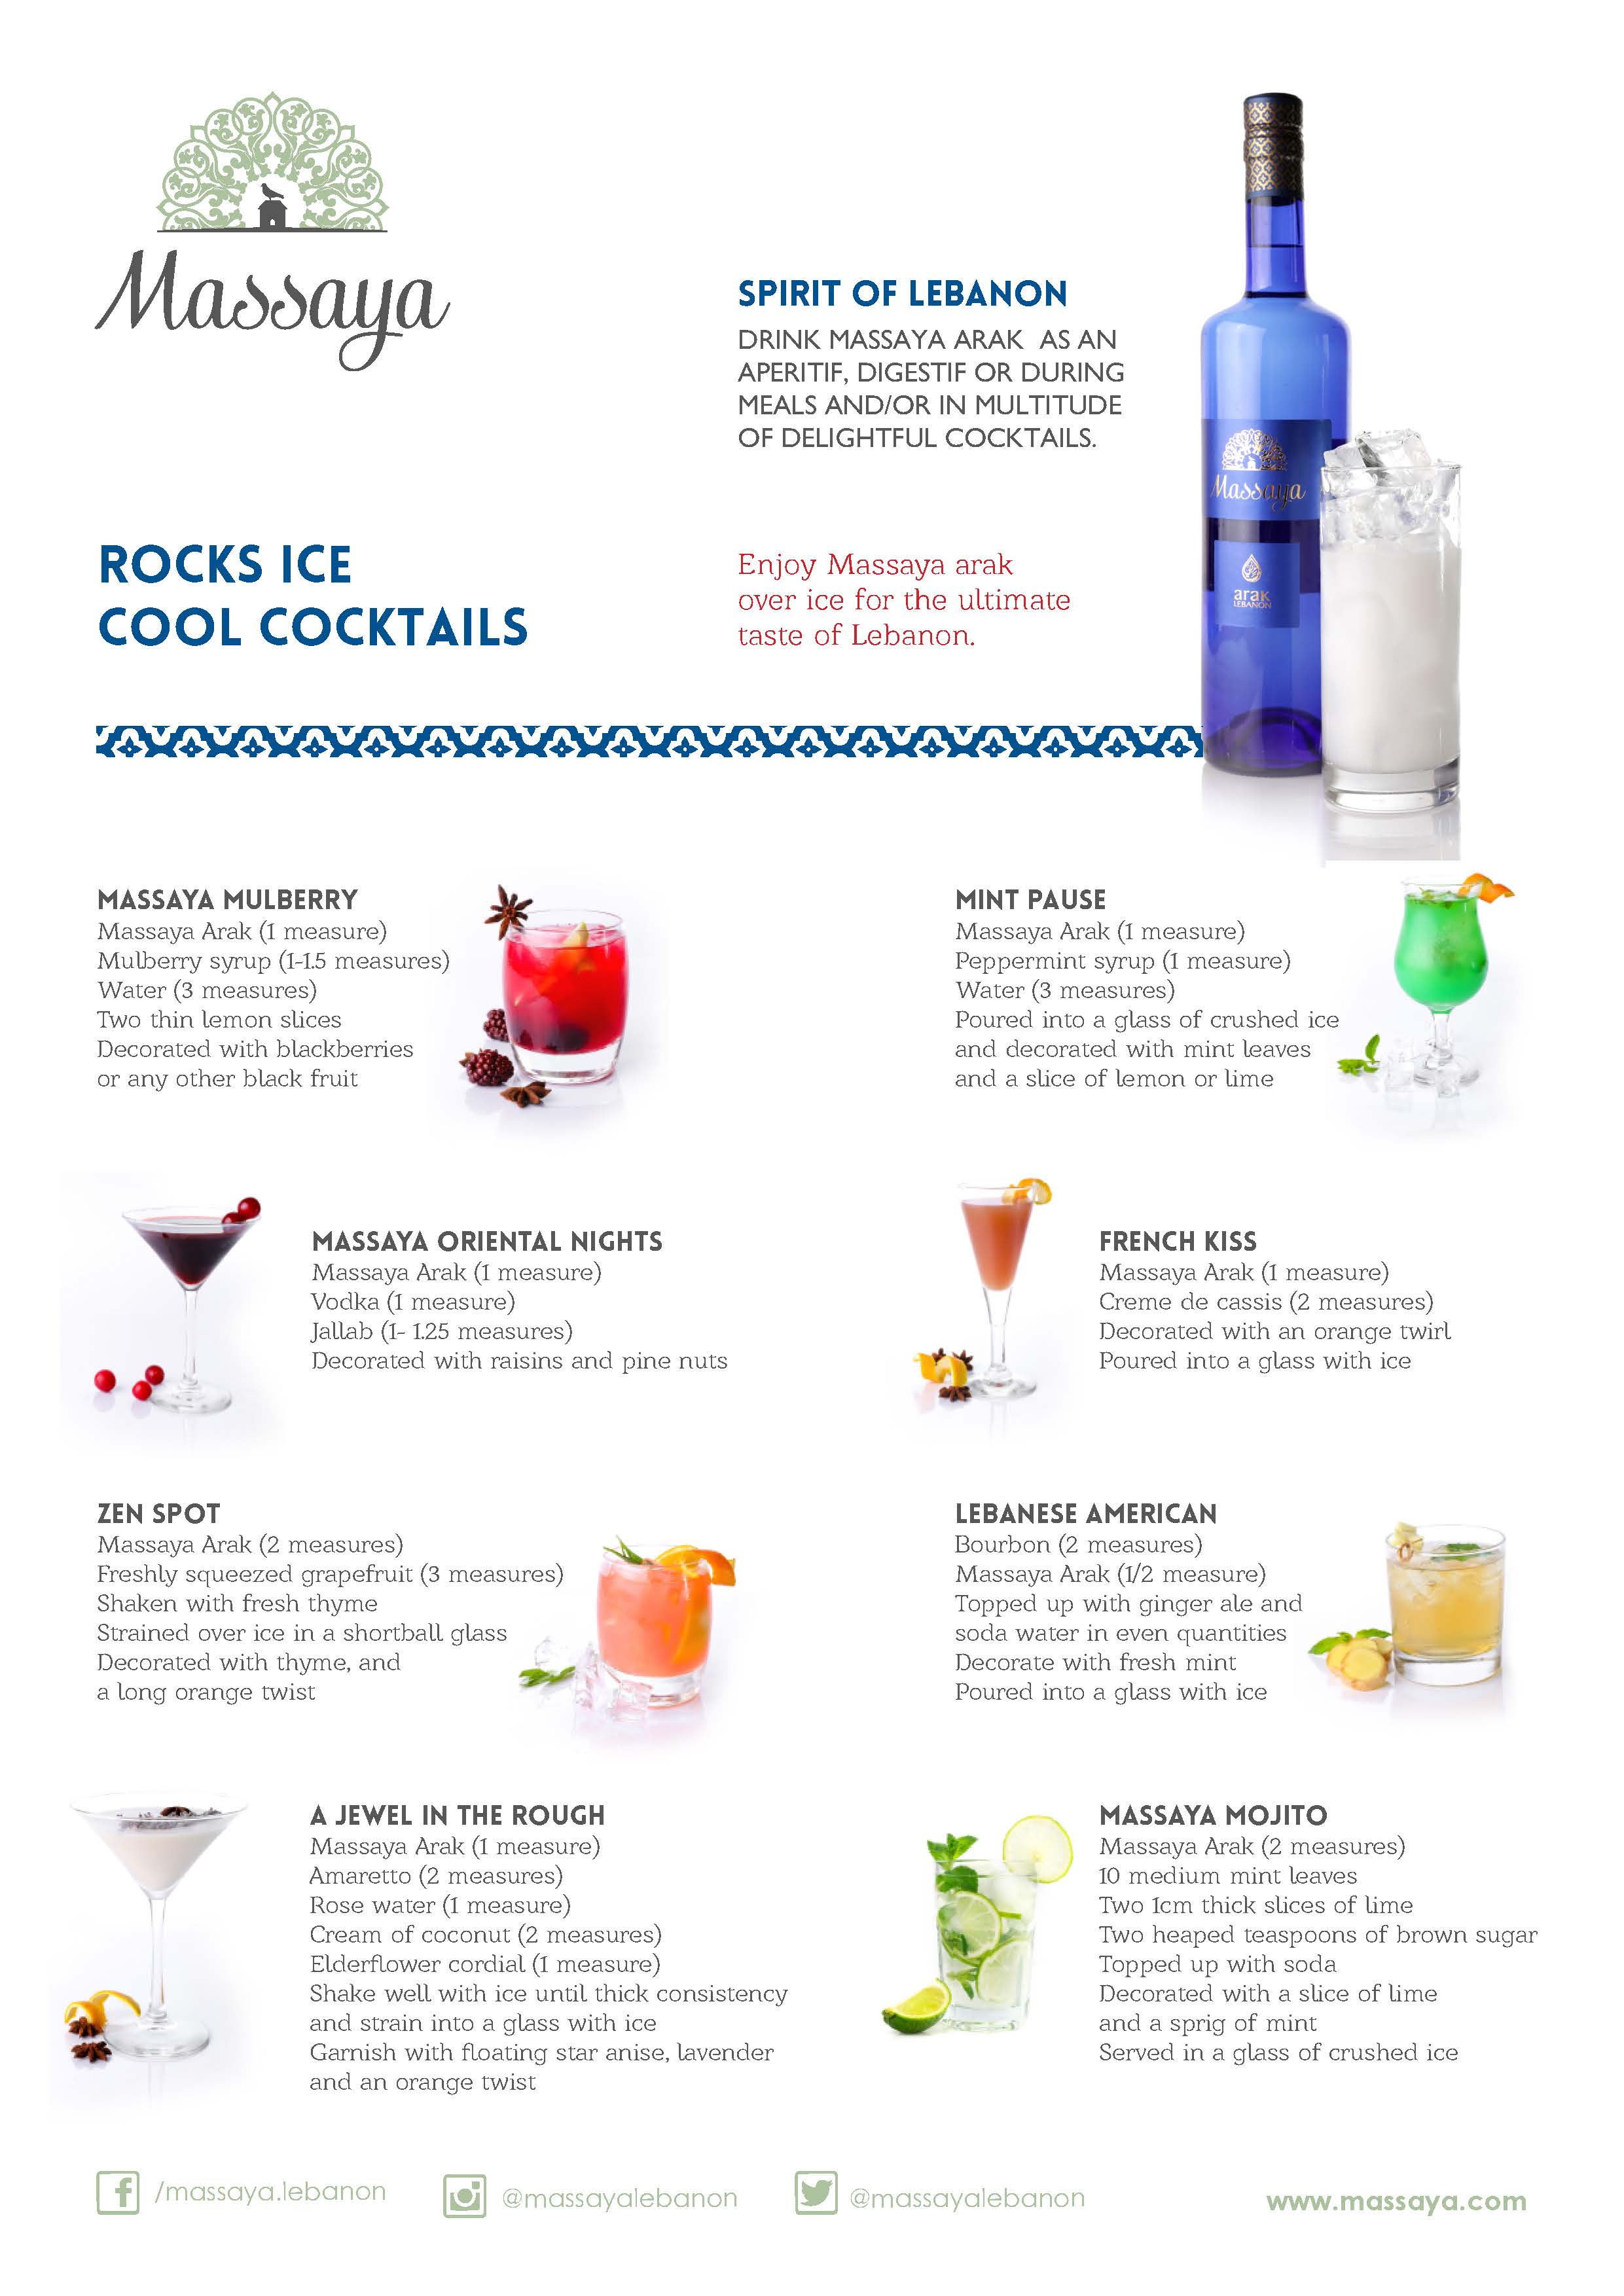 How to measure cocktail ingredients